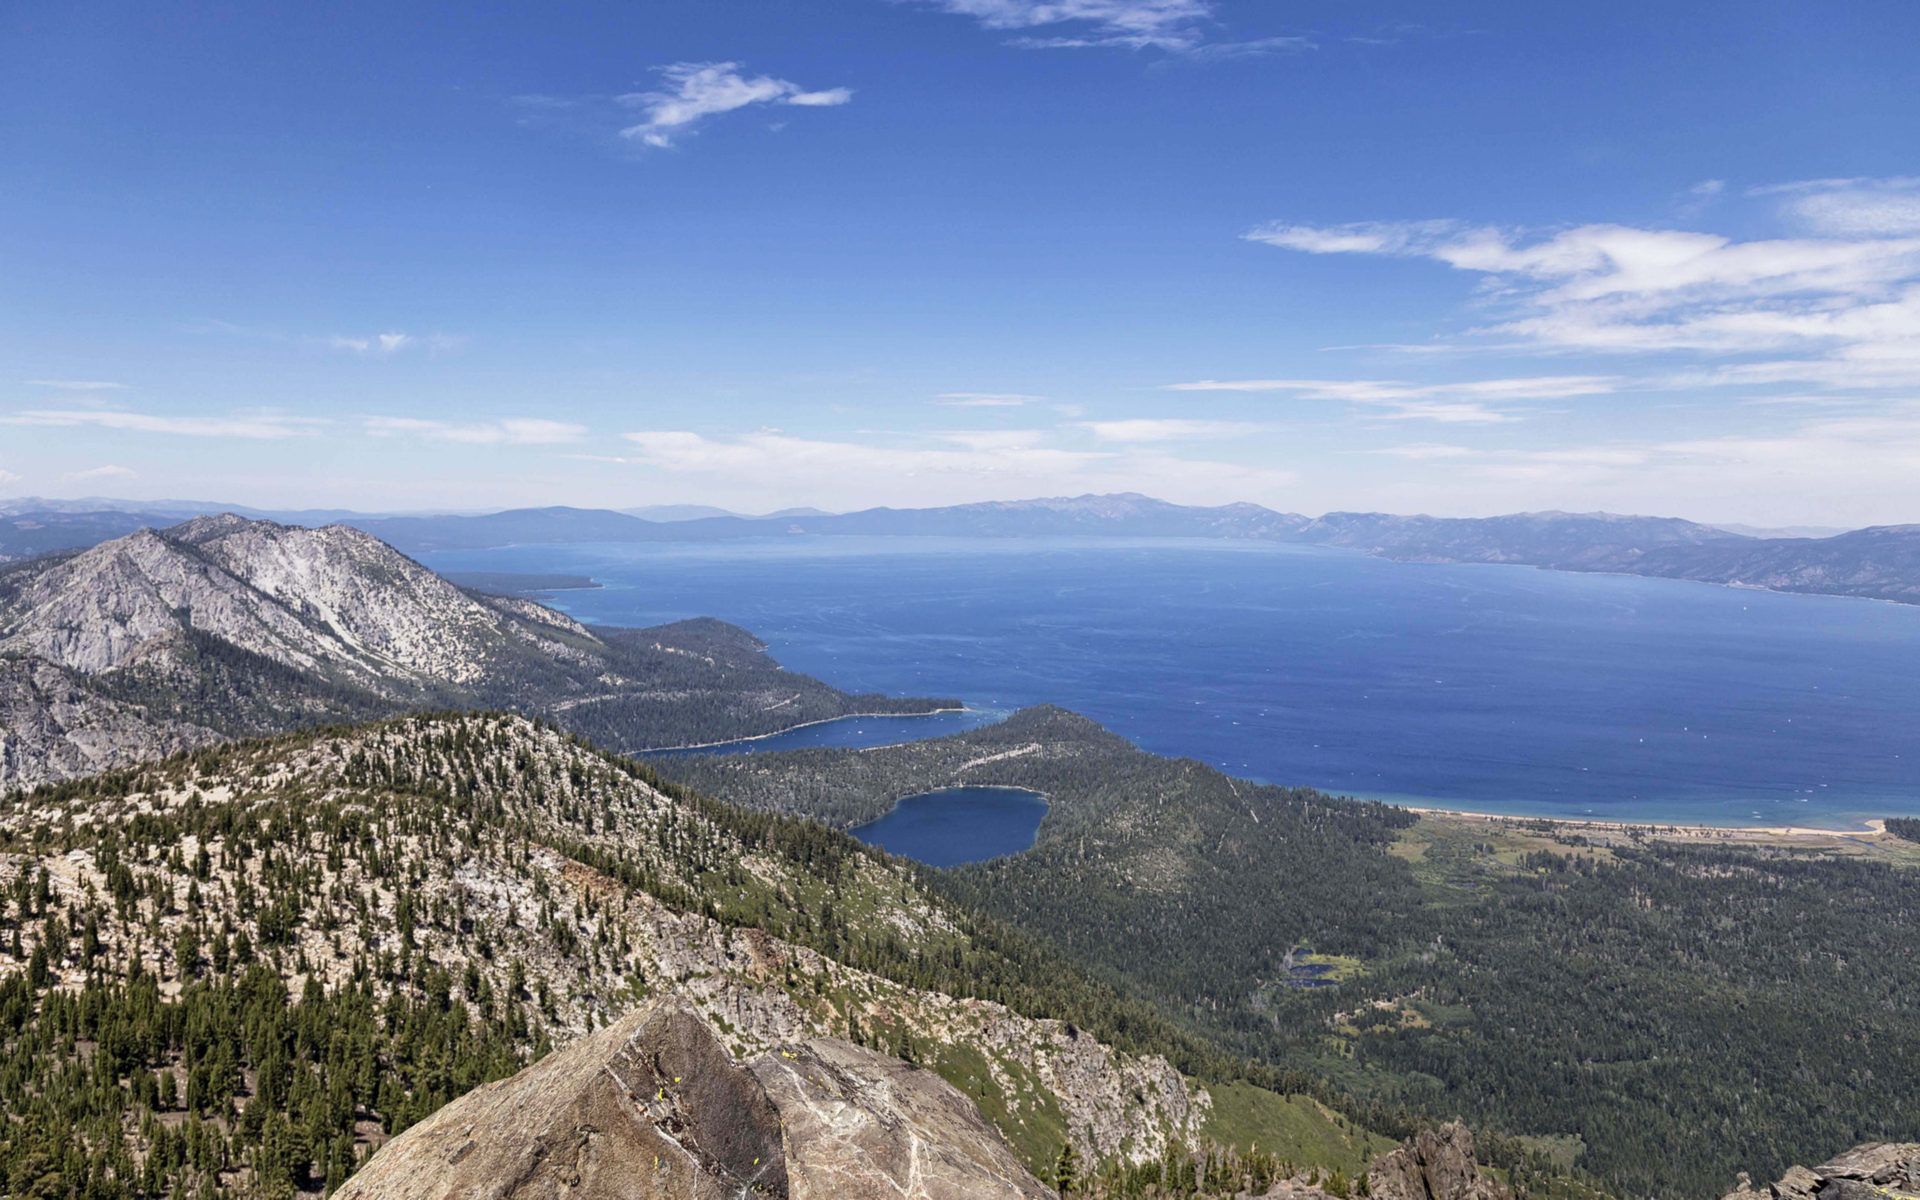 Lake Tahoe Alpine Freshwater Lake In Sierra Nevada In North America The Sixth Largest Lake Of Volume In The United States The View From The Top Of Mount Talac, Wallpaper13.com